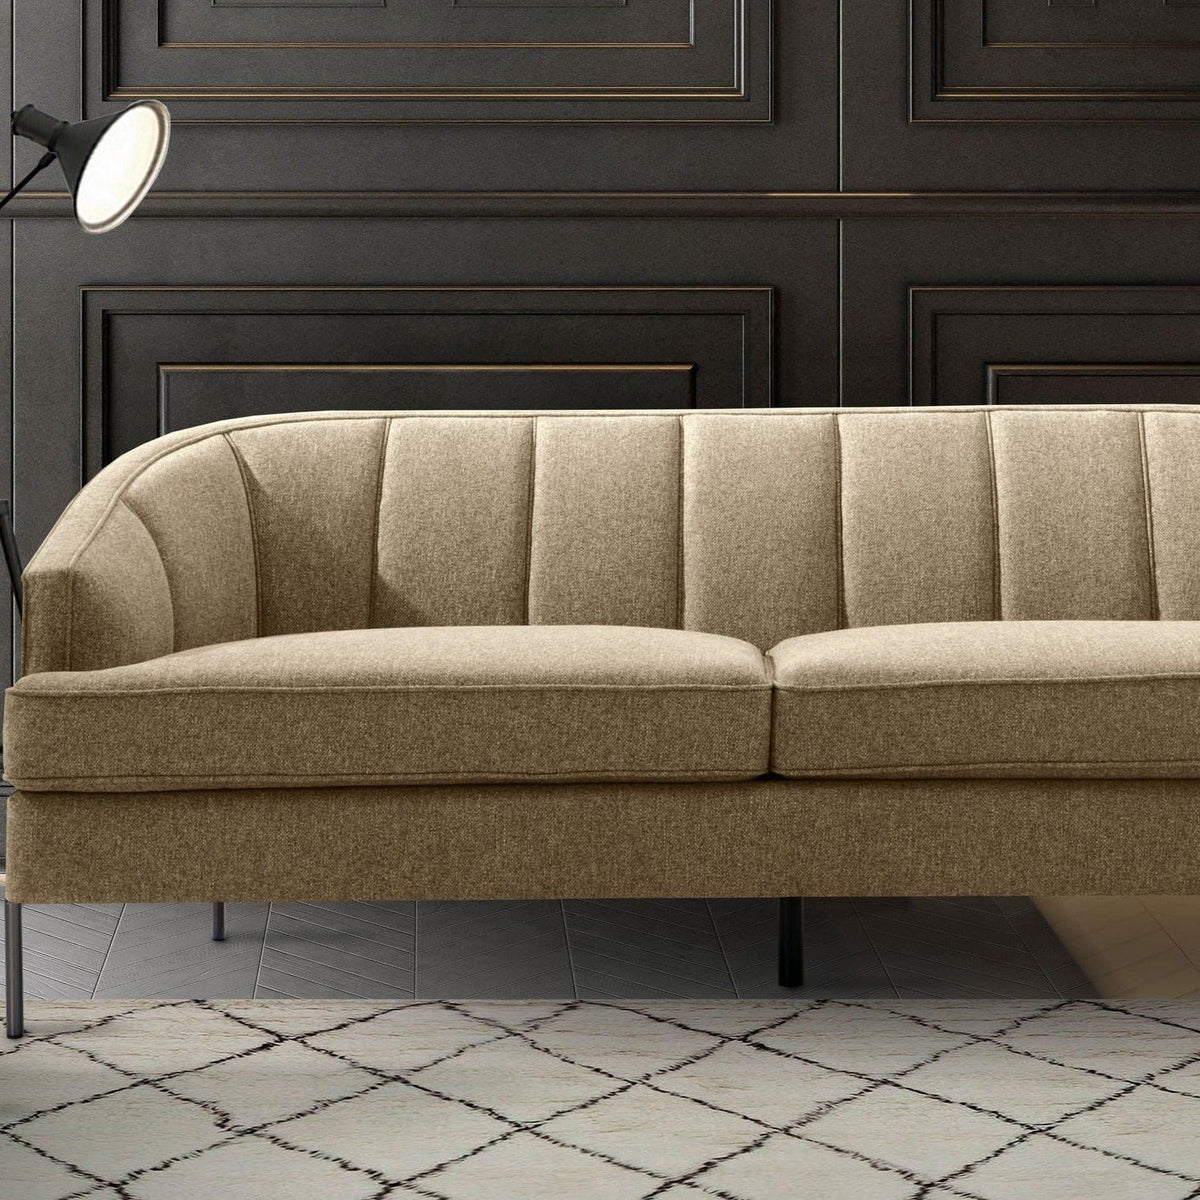 Iconic Home Astoria Linen Textured Sofa Taupe